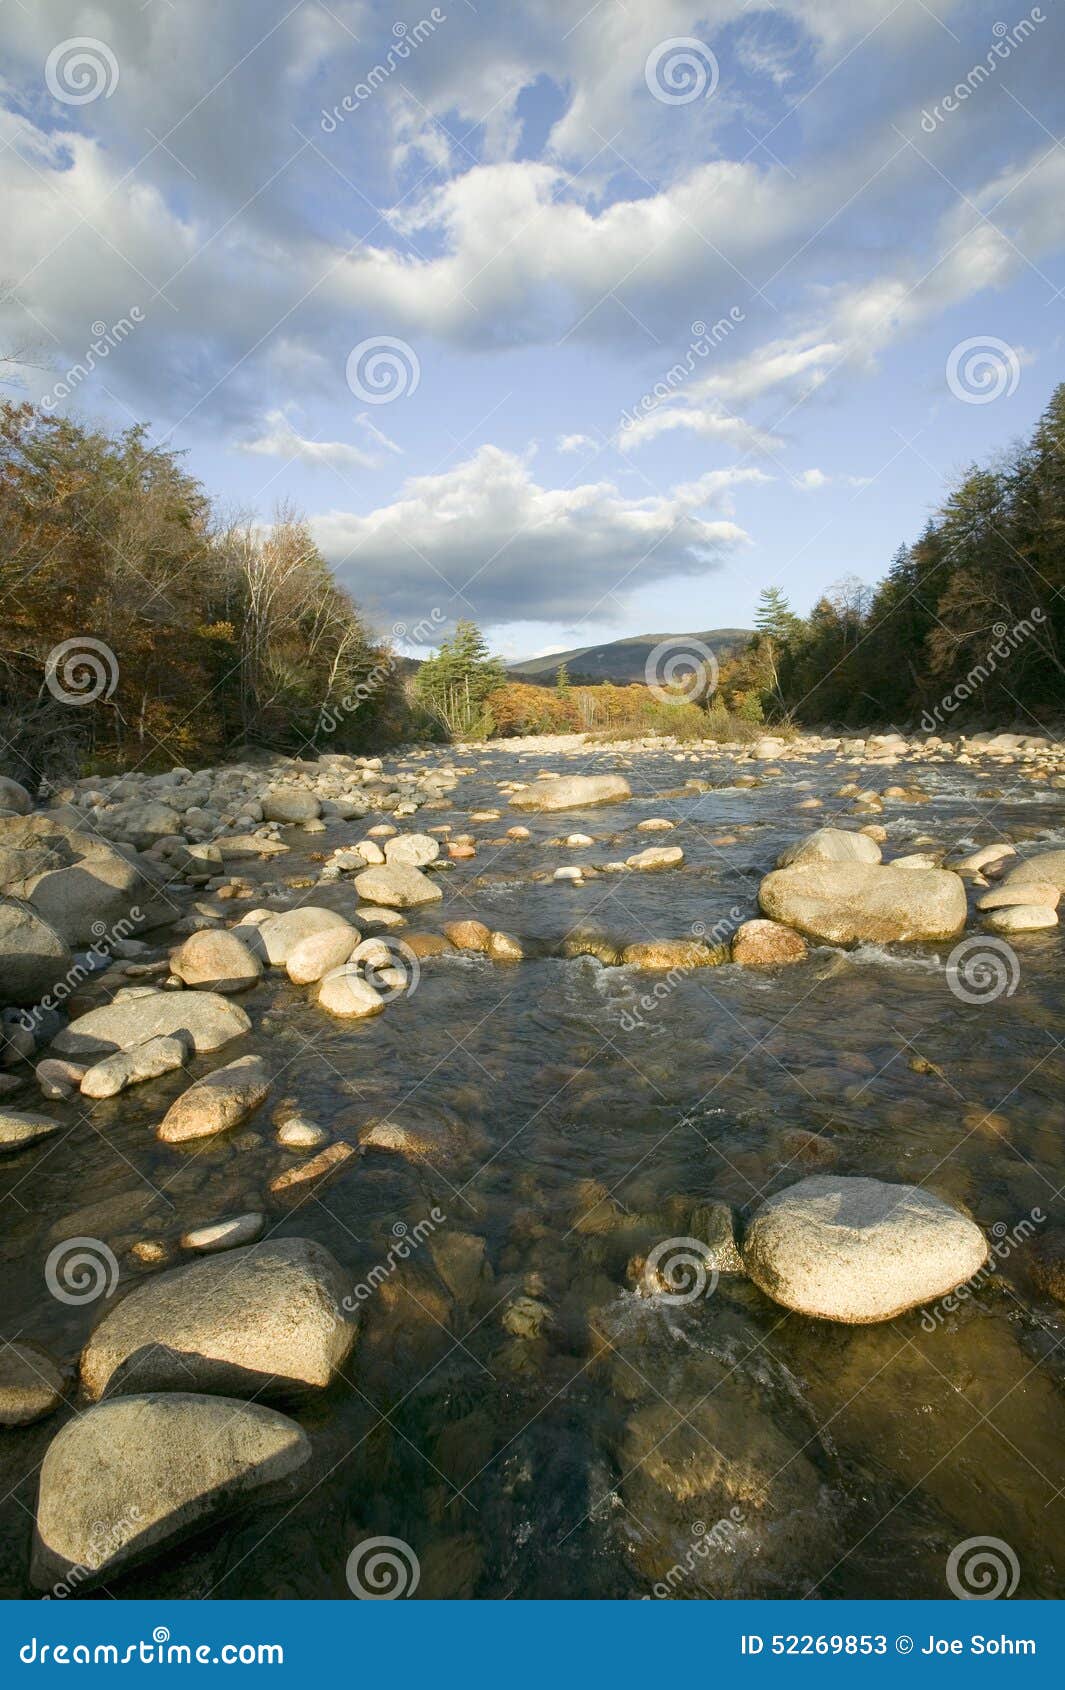 autumn stream in crawford notch state park in white mountains of new hampshire, new england